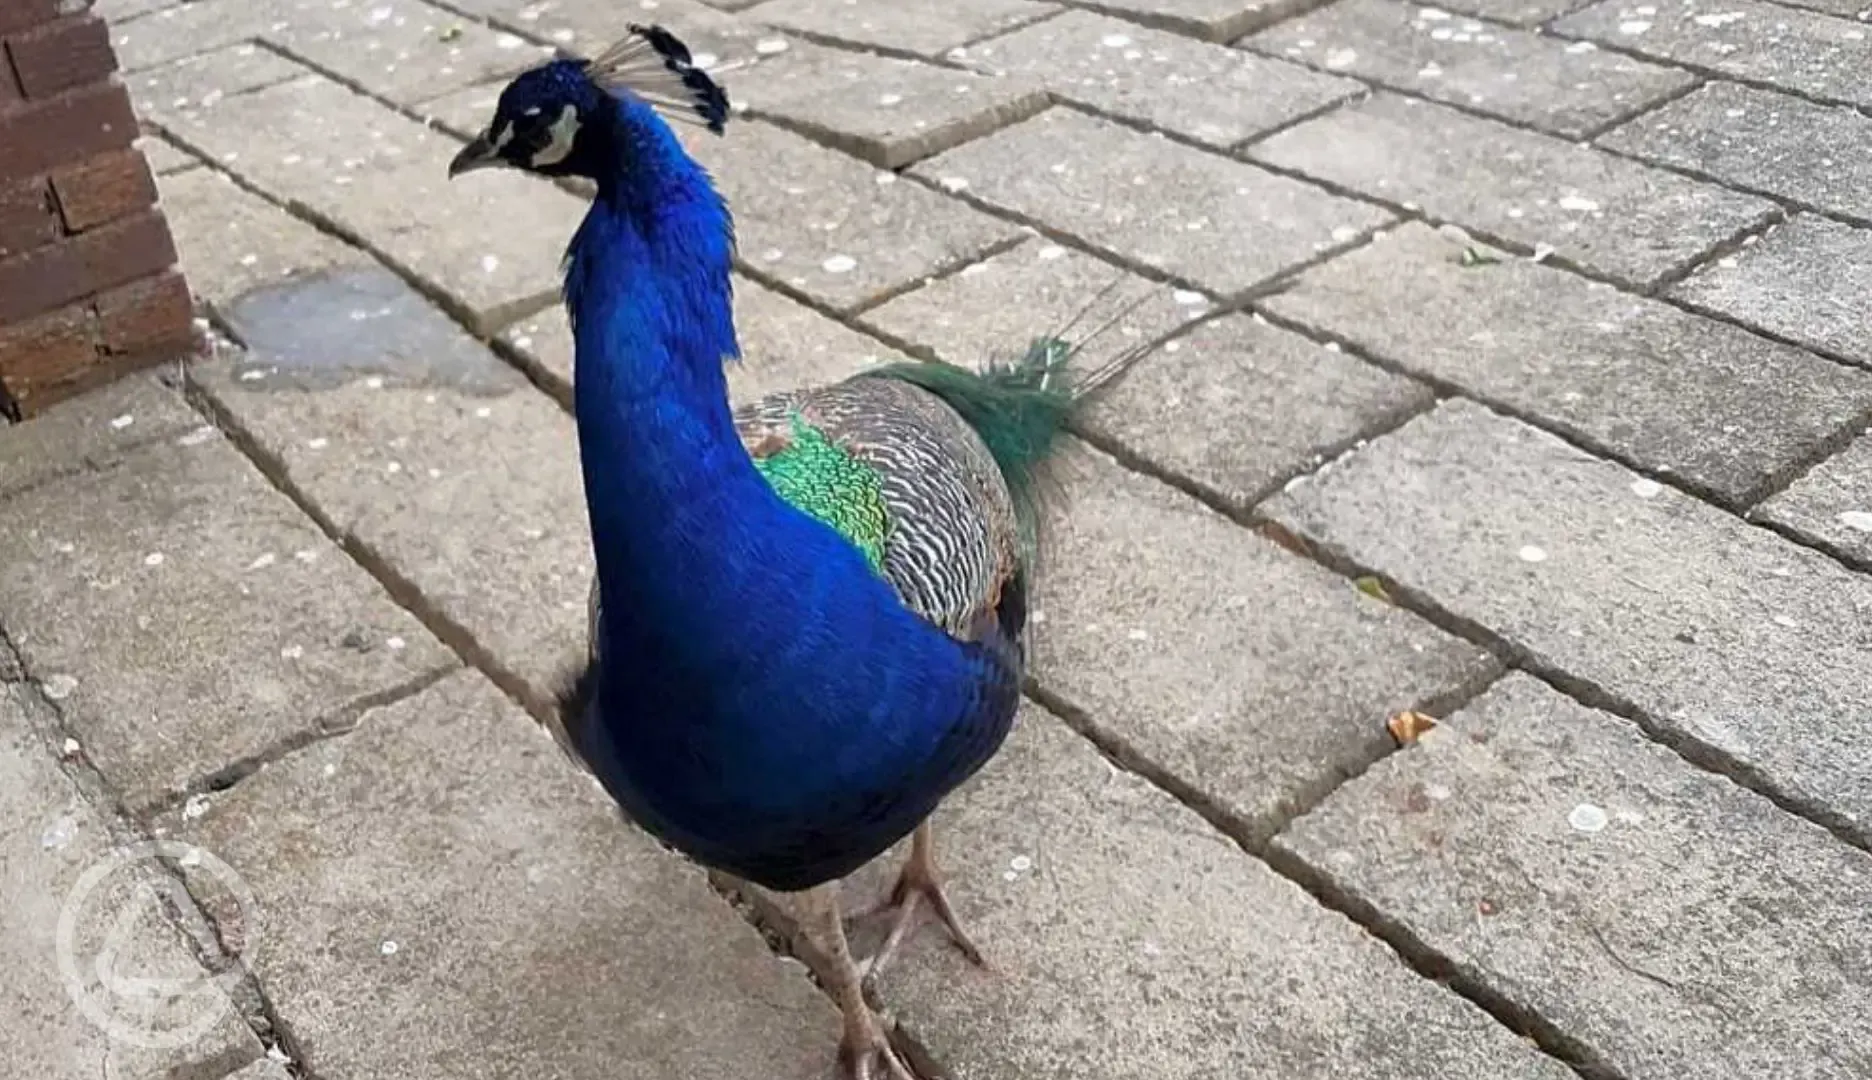 William the Indian Peacock onsite